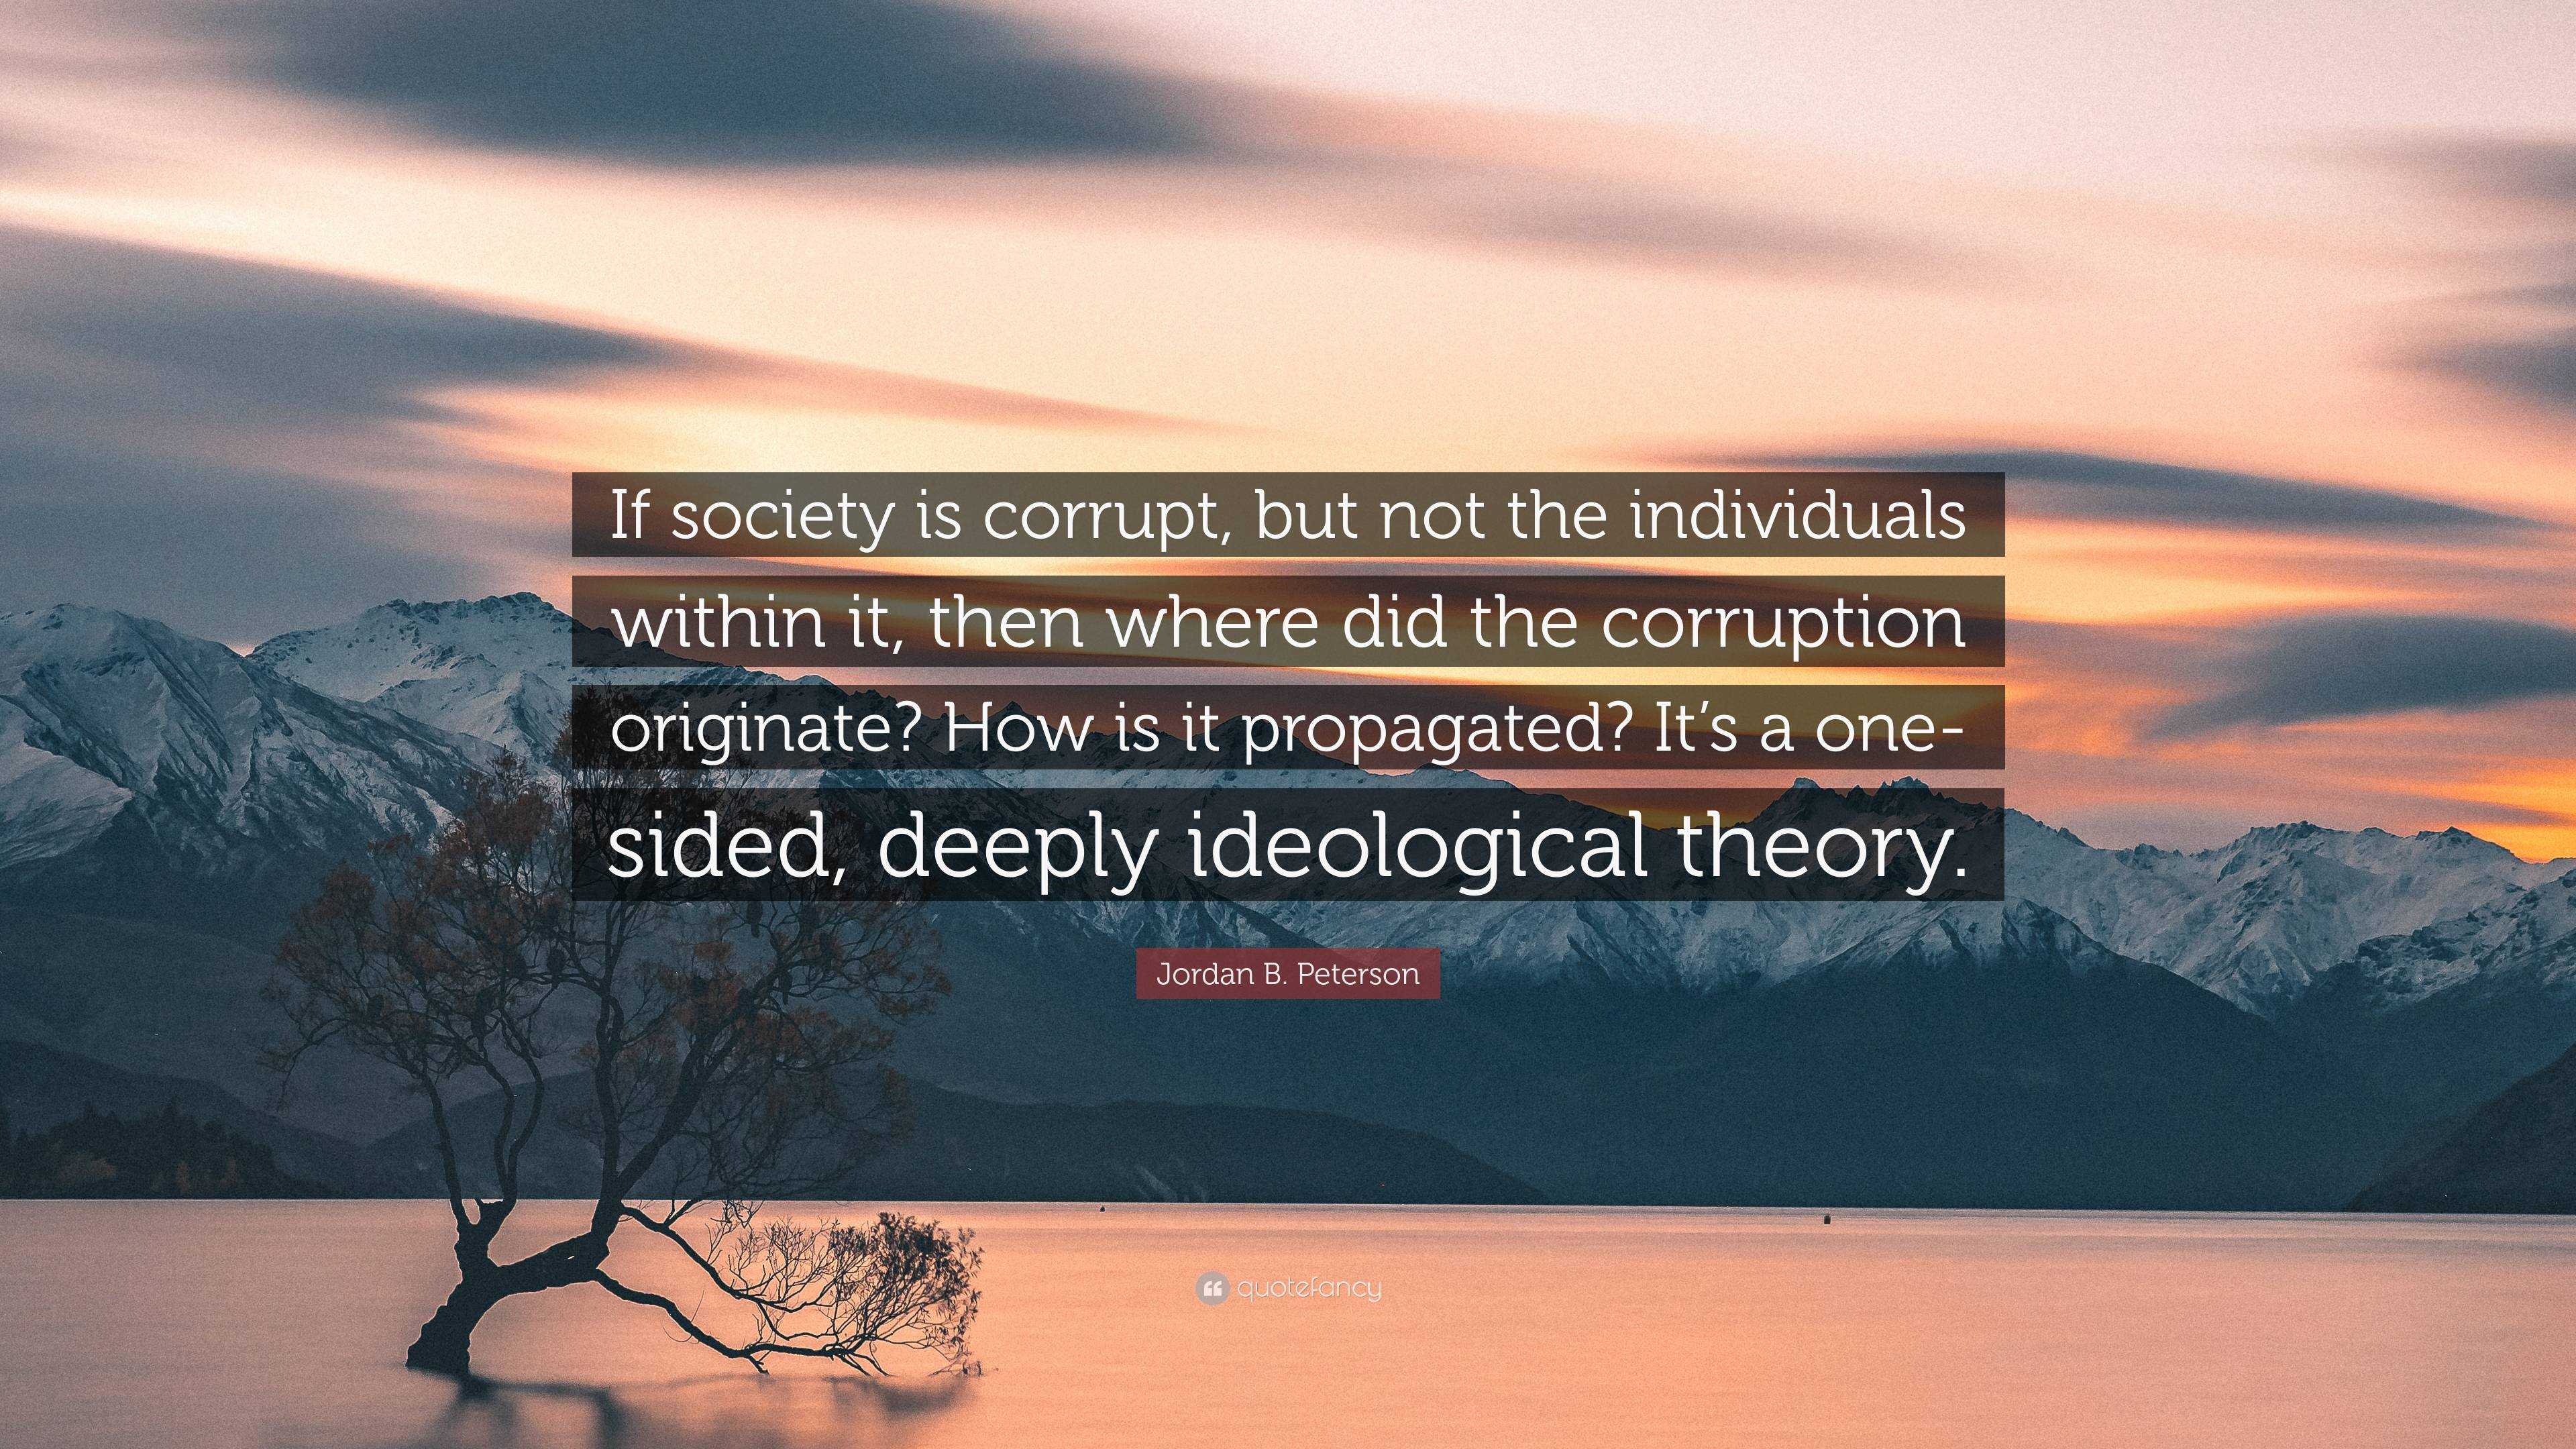 B. Peterson Quote: “If is corrupt, but not individuals within it, then where did the corruption originate? How is it propagated?...”